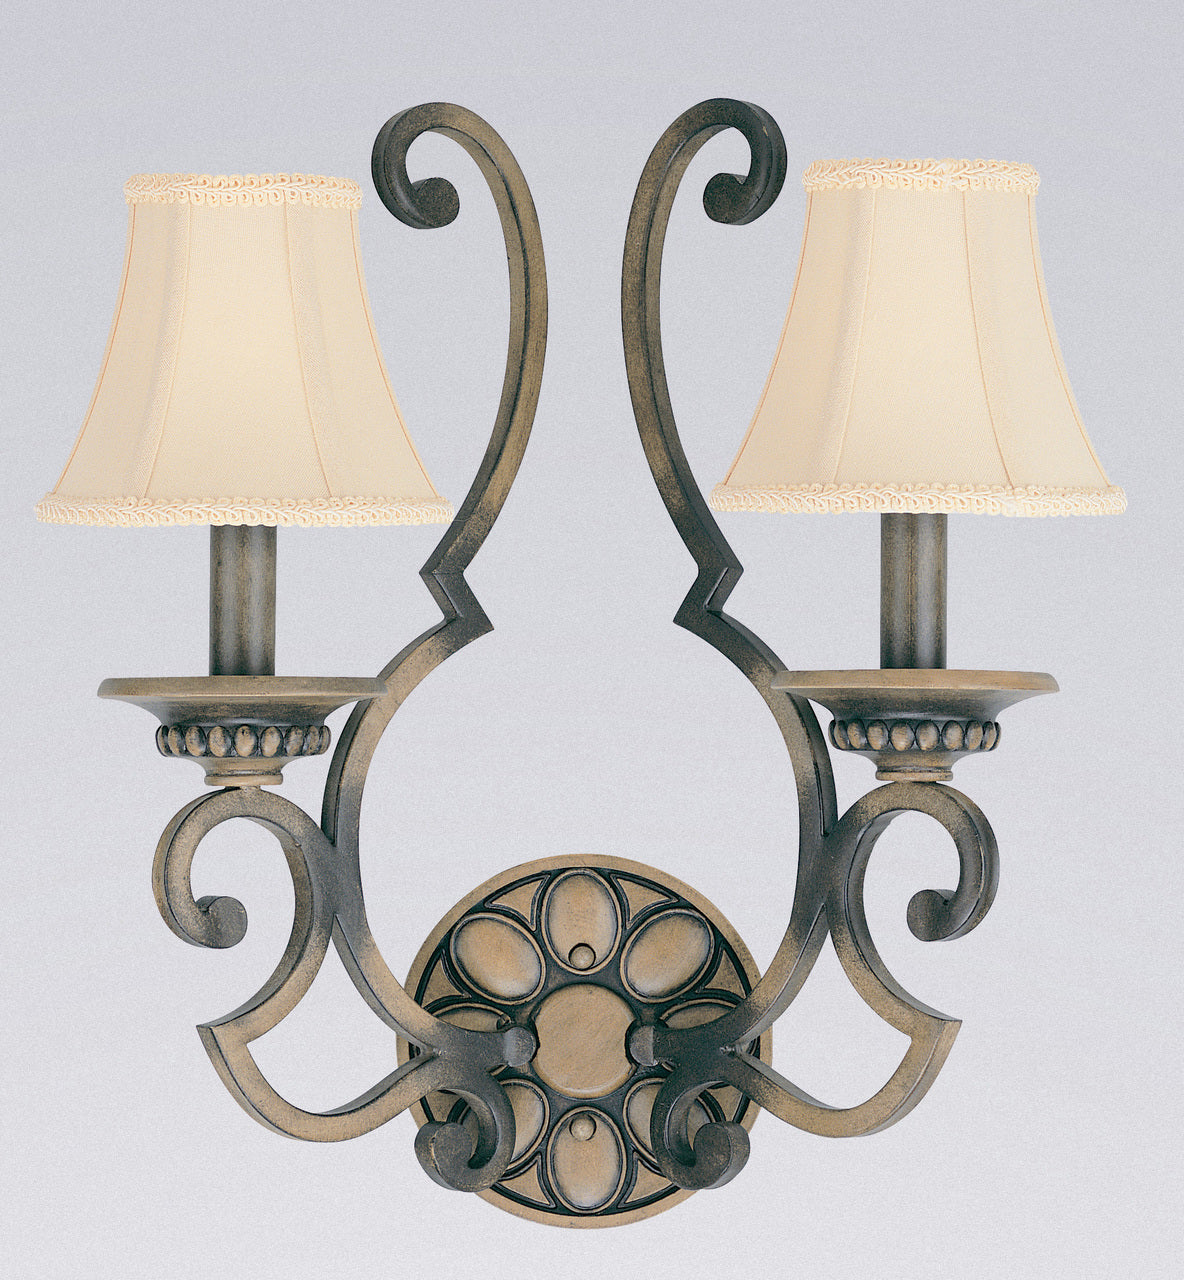 Classic Lighting 92702 HRW Westchester Wrought Iron Wall Sconce in Honey Walnut